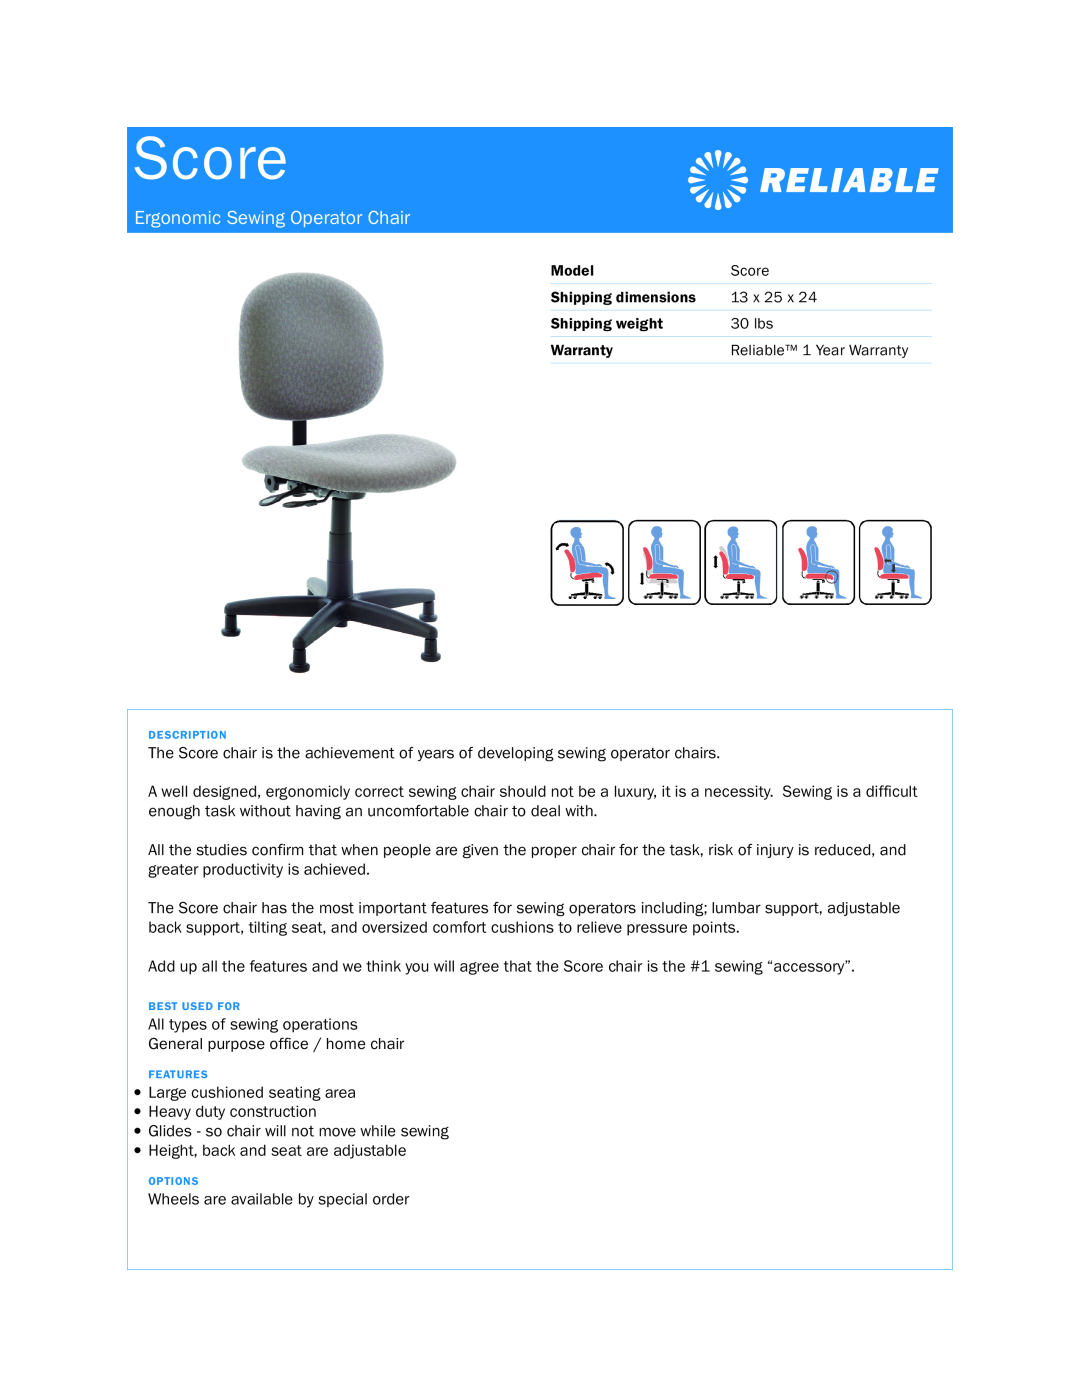 Reliable Score dimensions Ergonomic Sewing Operator Chair, Model, Shipping dimensions, Shipping weight, 30 lbs, Warranty 